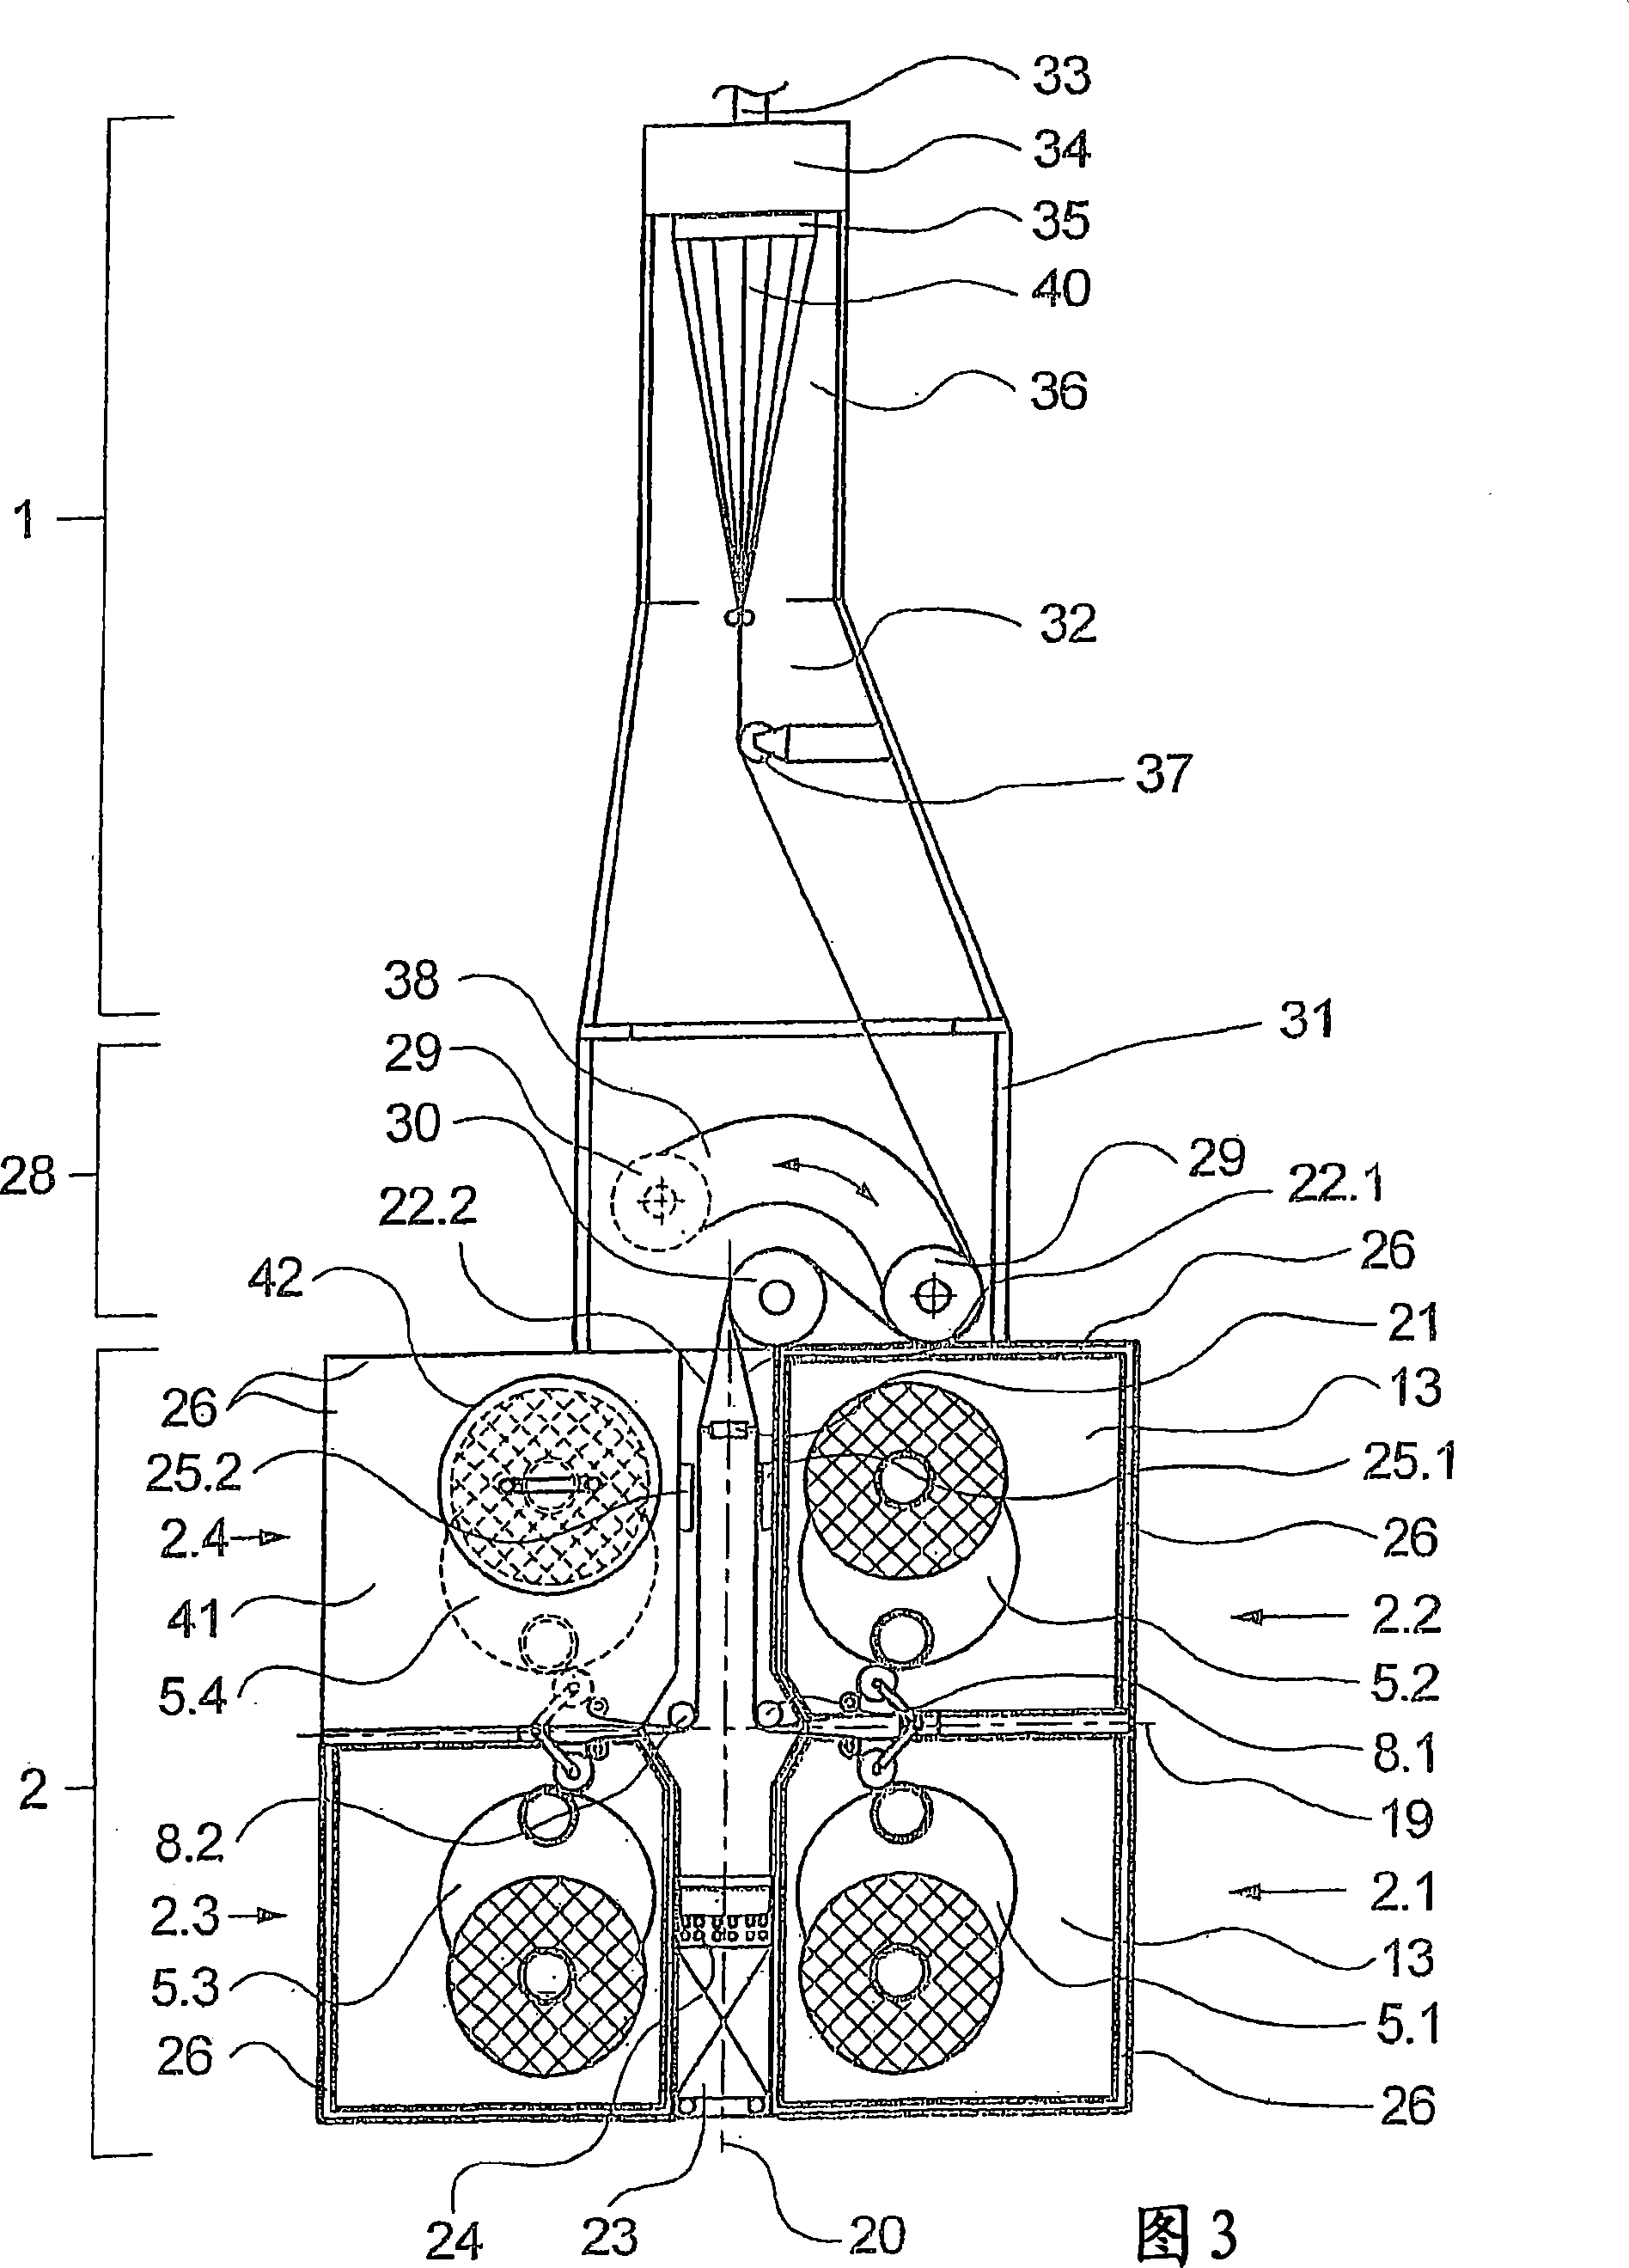 Apparatus for spinning and winding several synthetic threads